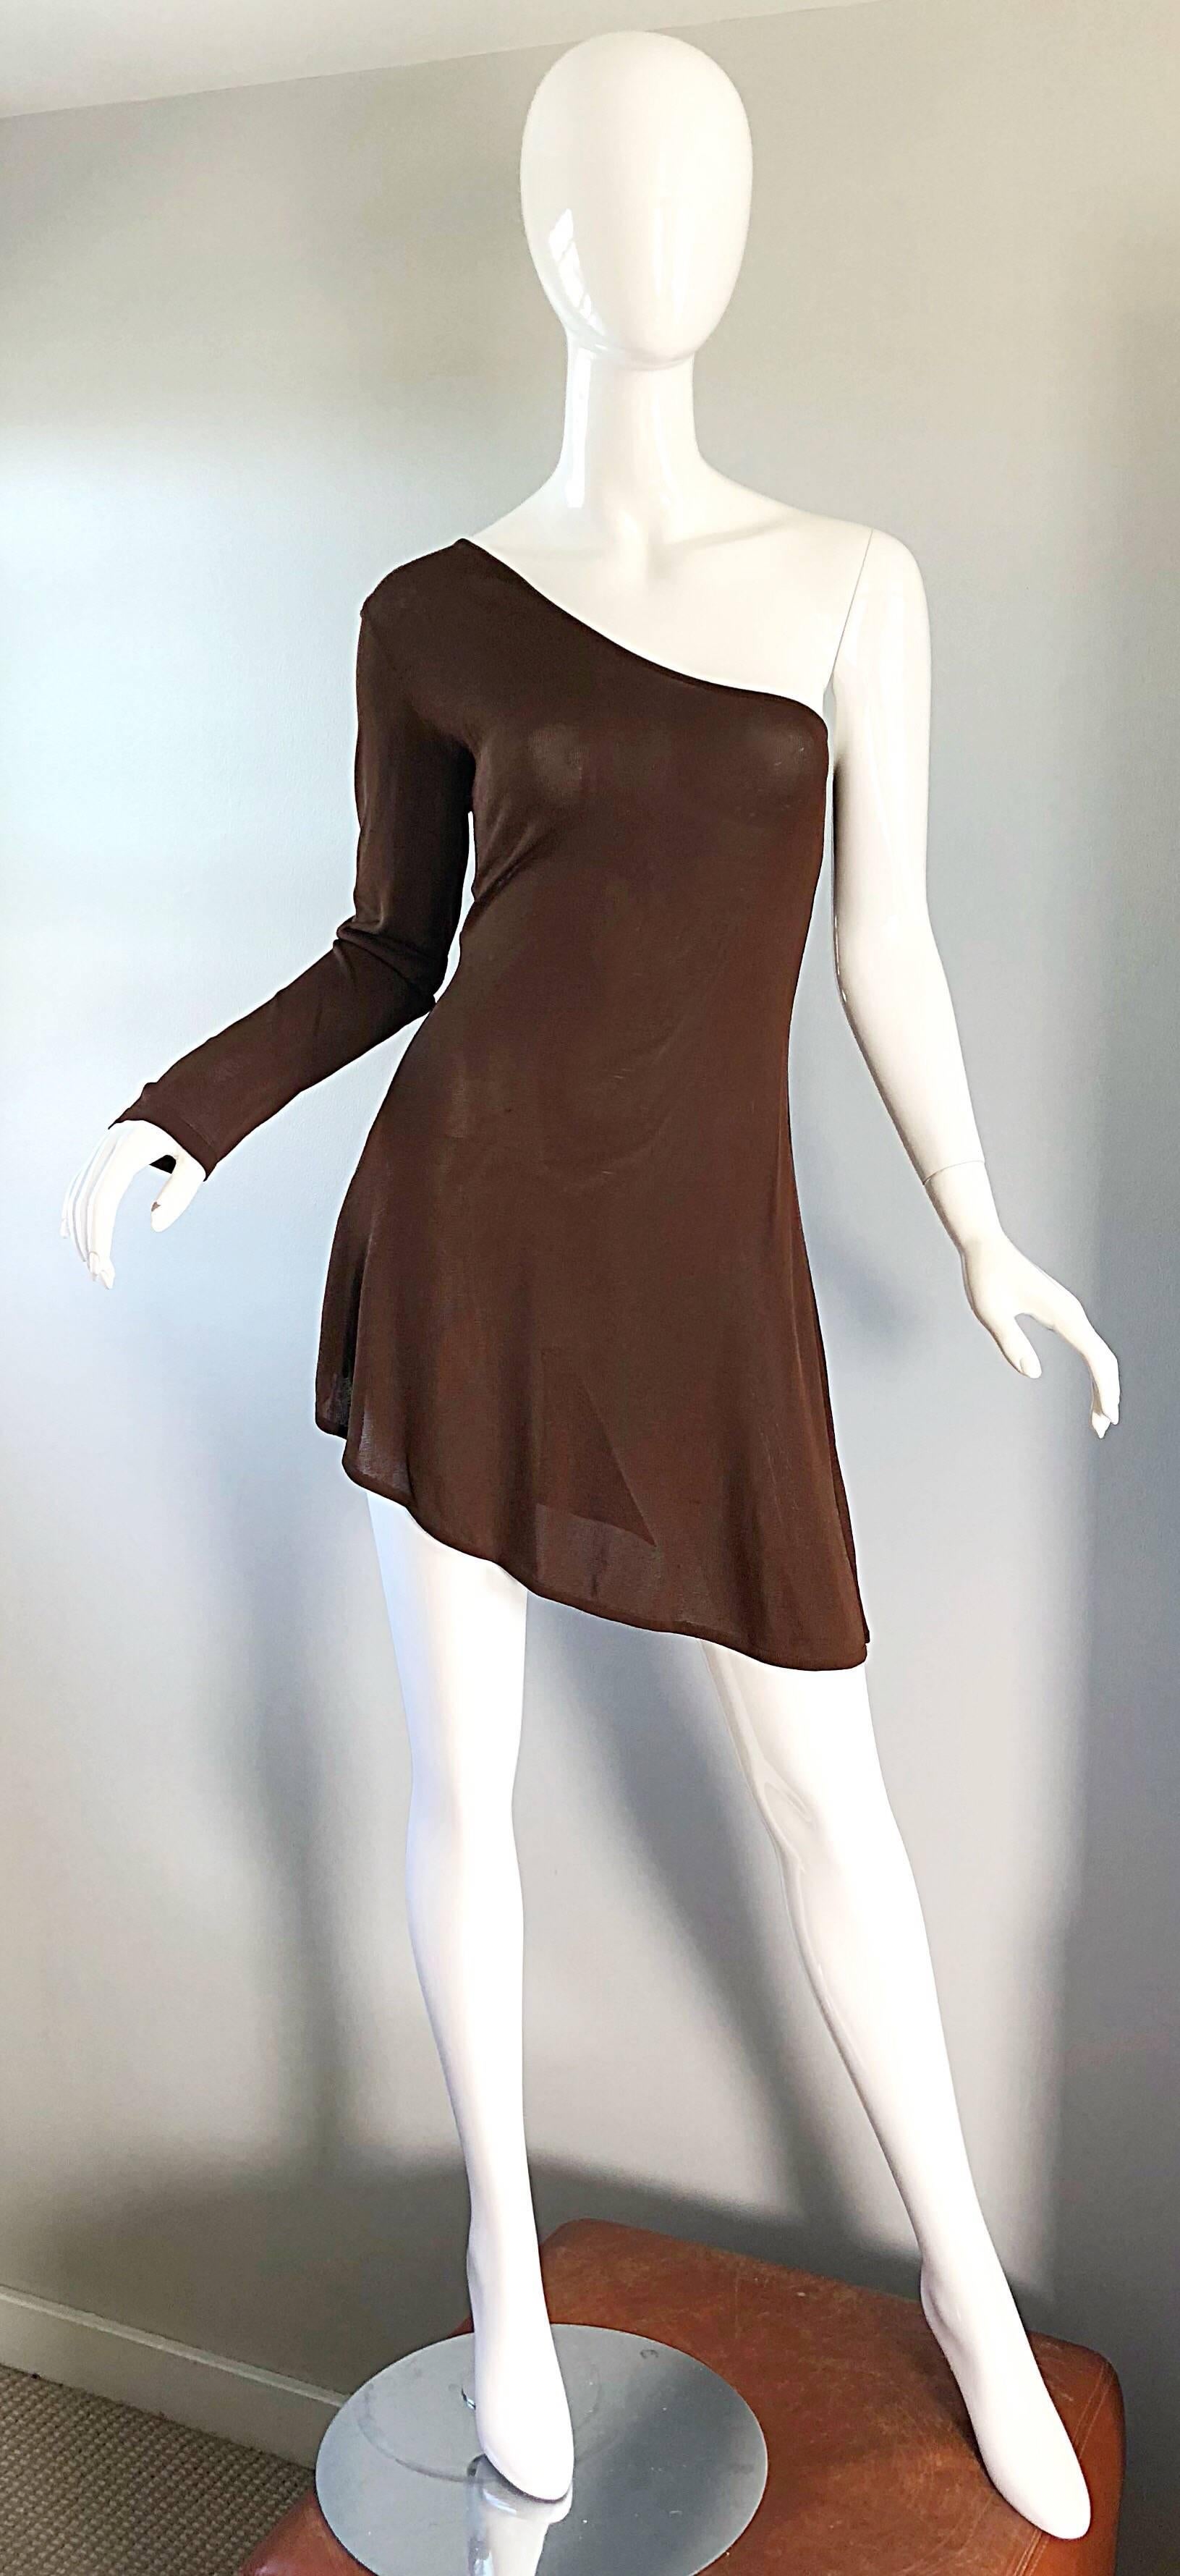 Sexy 1990s ALBERTA FERRETTI chocolate brown one shoulder mini dress / tunic! Simply slips over the head and stretches to fit. Great alone or belted, with jeans, etc. Soft rayon knit fabric looks fantastic on! Also looks great with the pictured brown